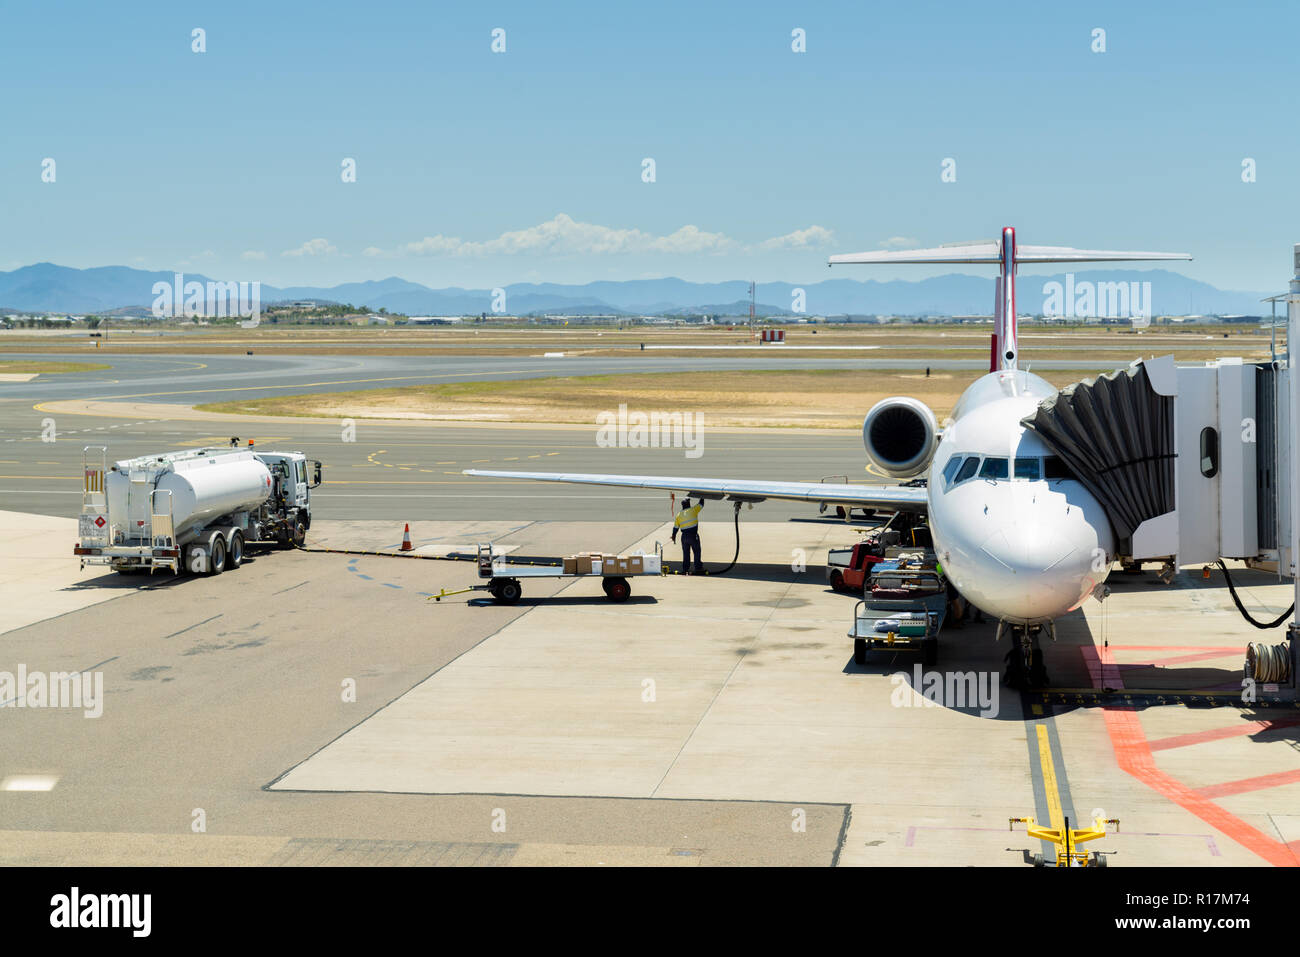 Luggage being loaded and plane being refuelled in preparation for takeoff at Townsville airport, Australia Stock Photo